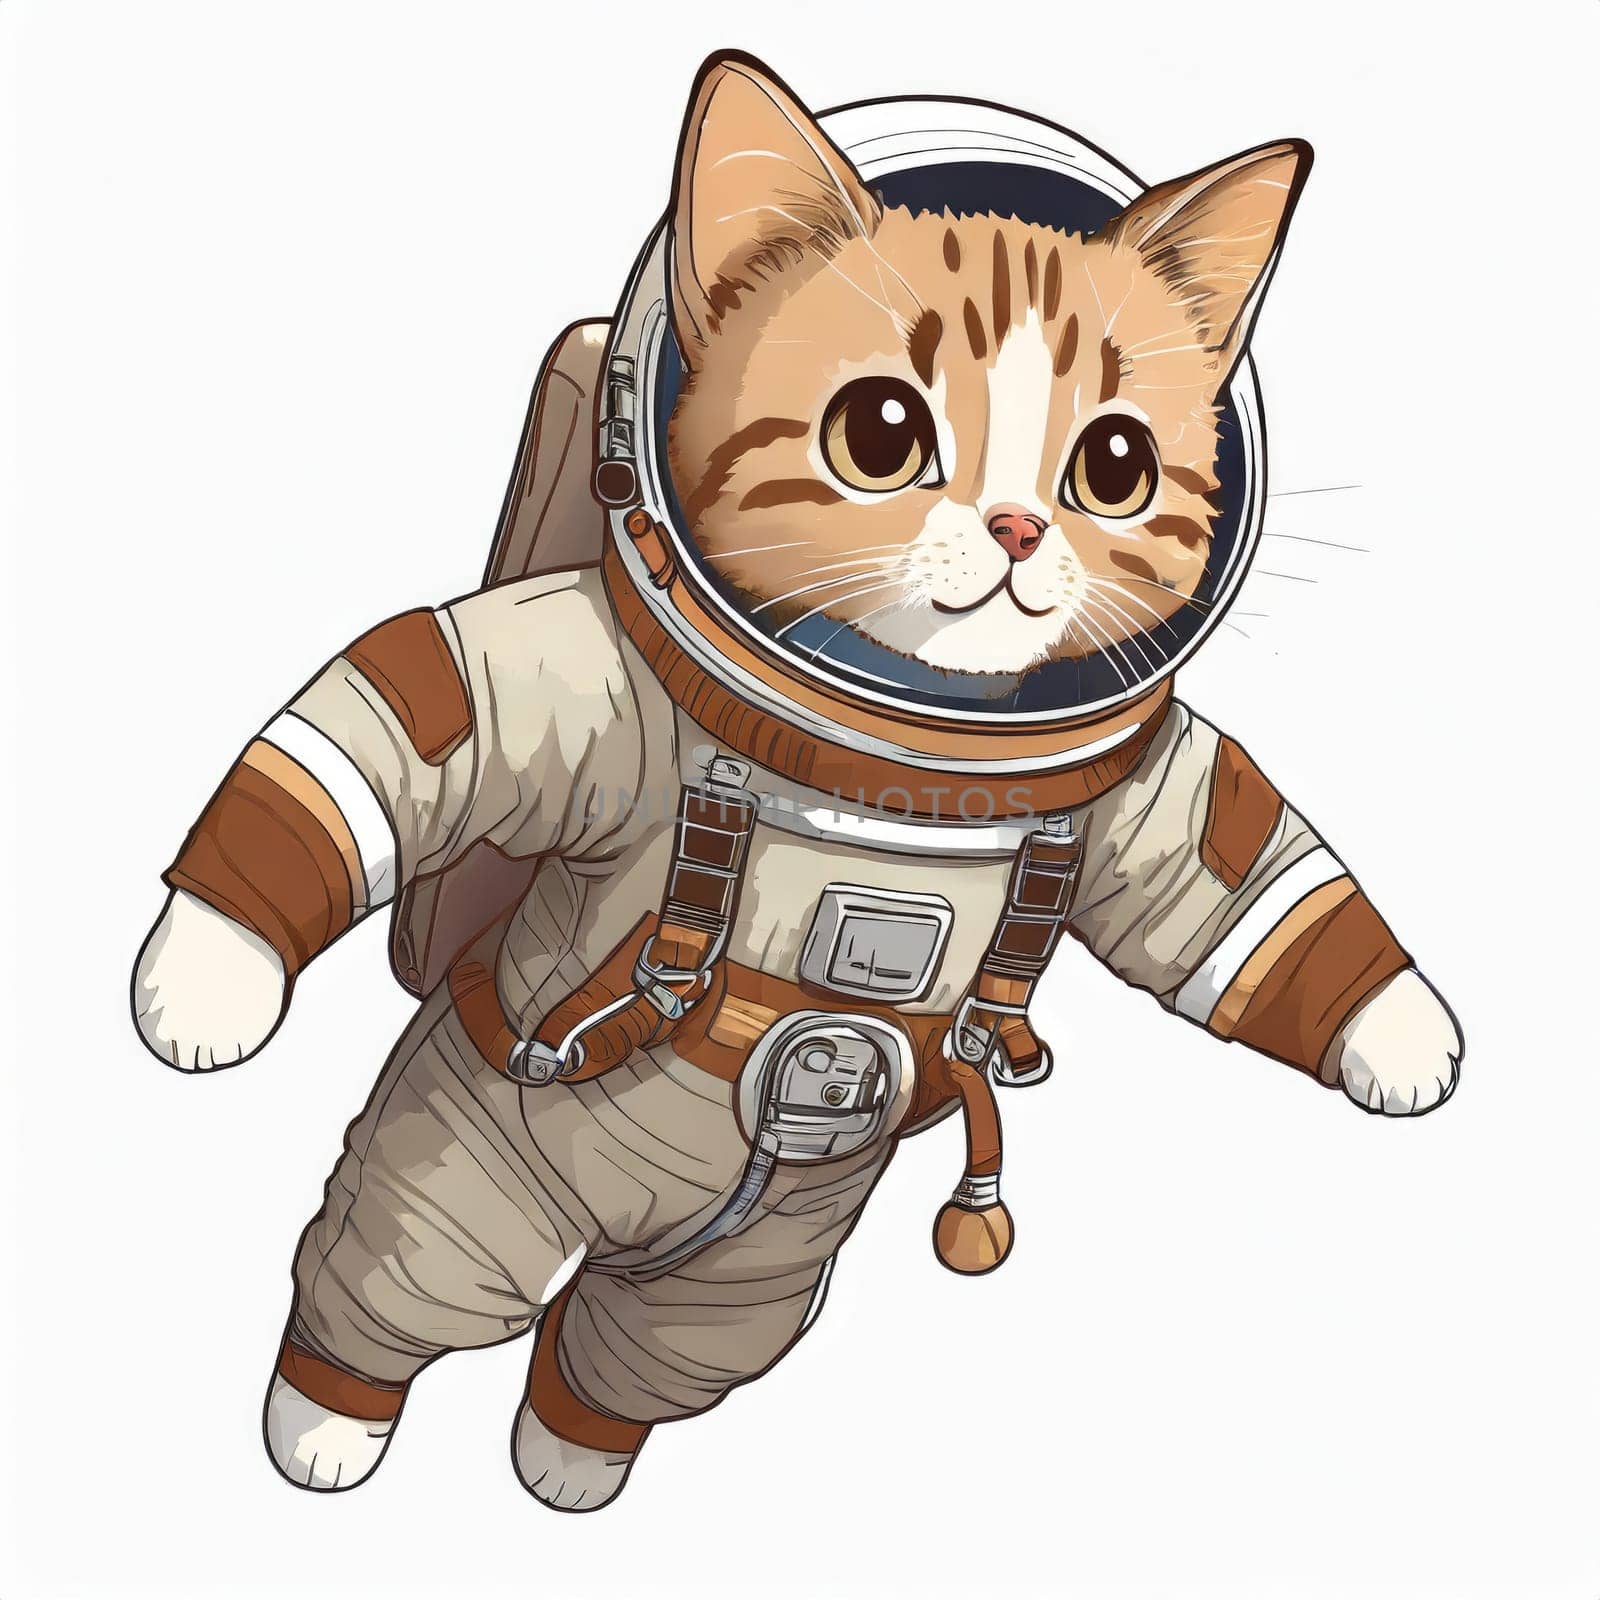 Anime cute a cat in astronaut uniform on flying, white background 